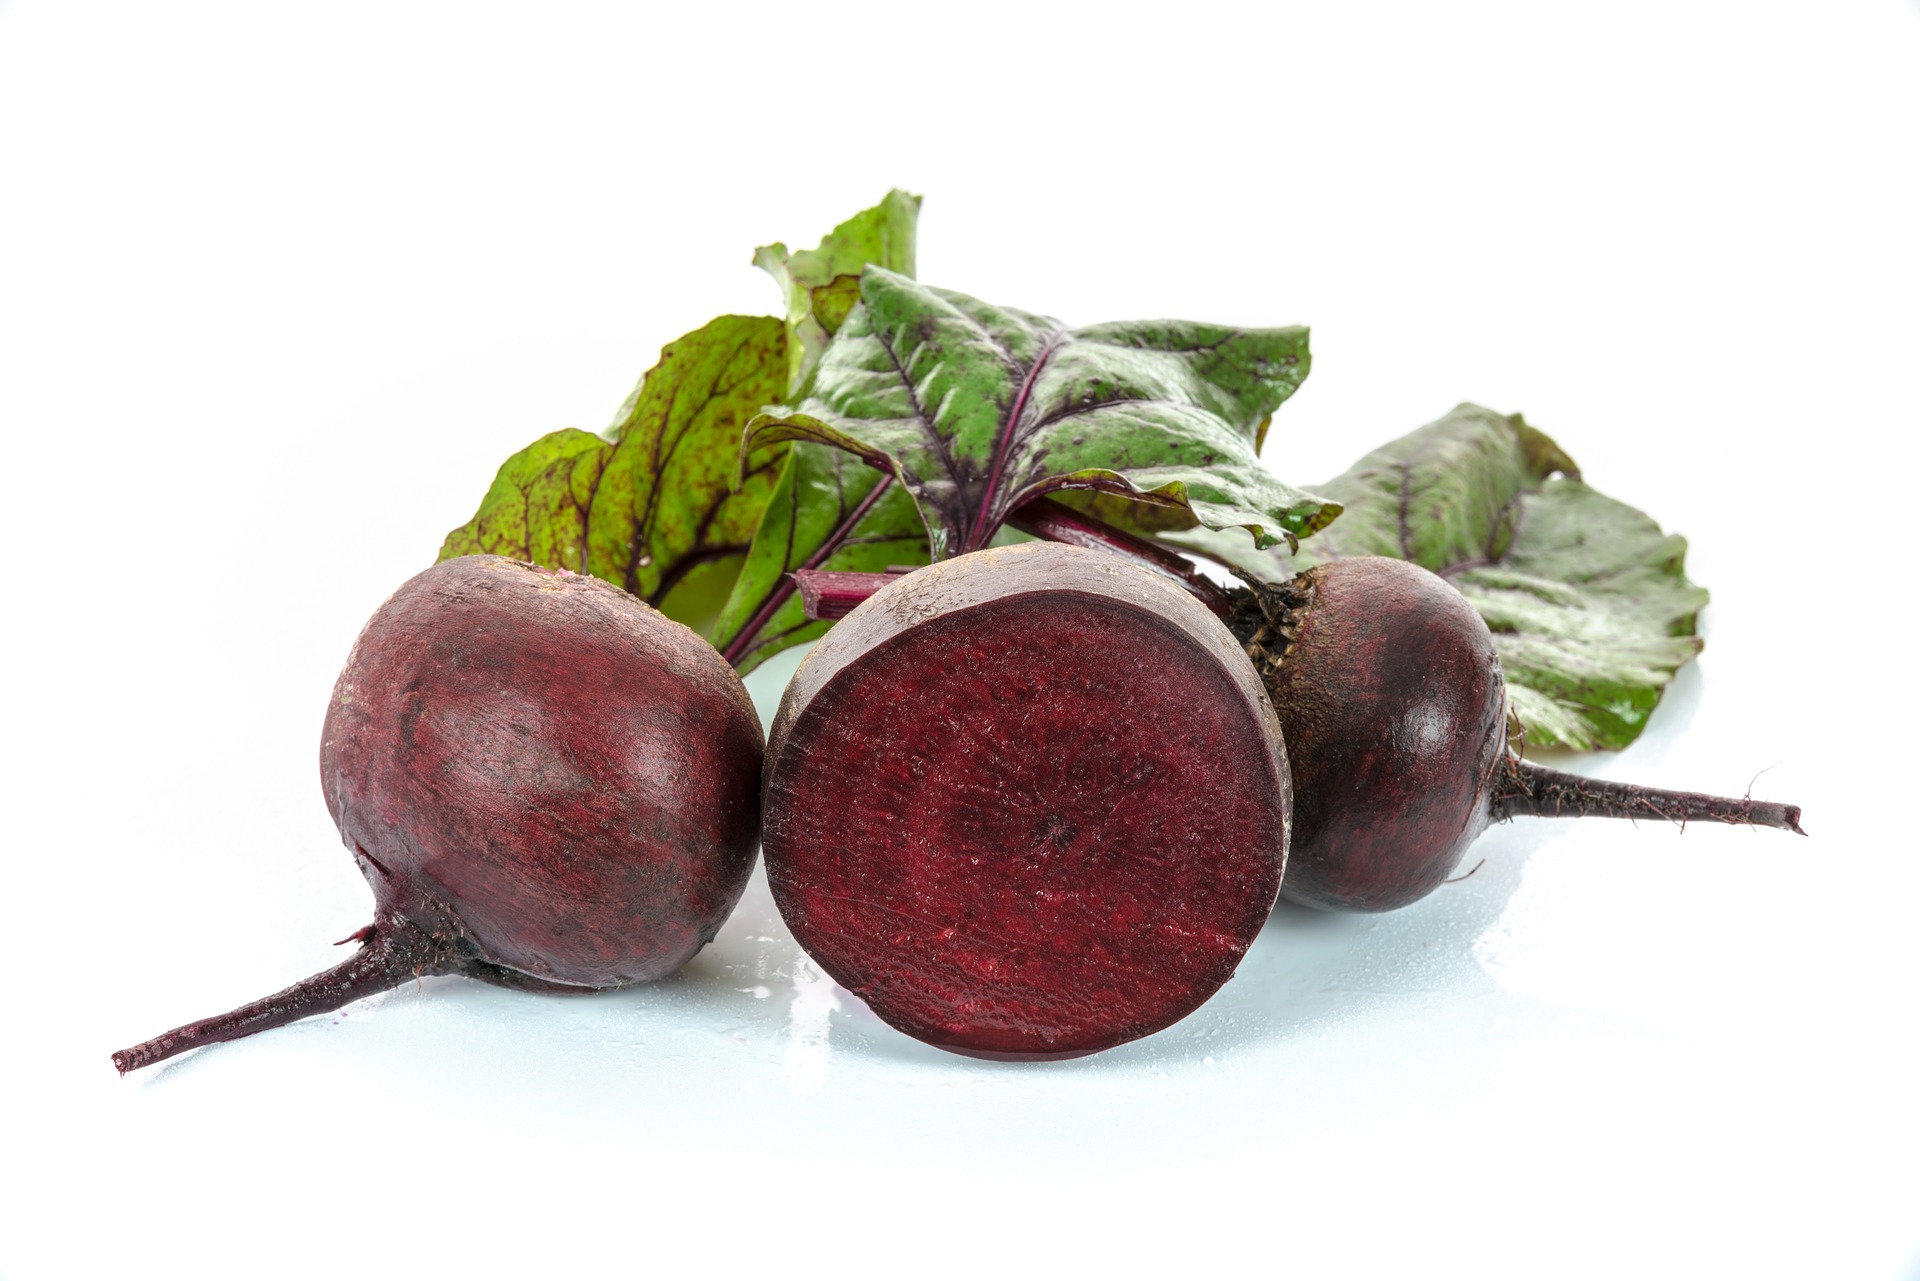 Beet picture